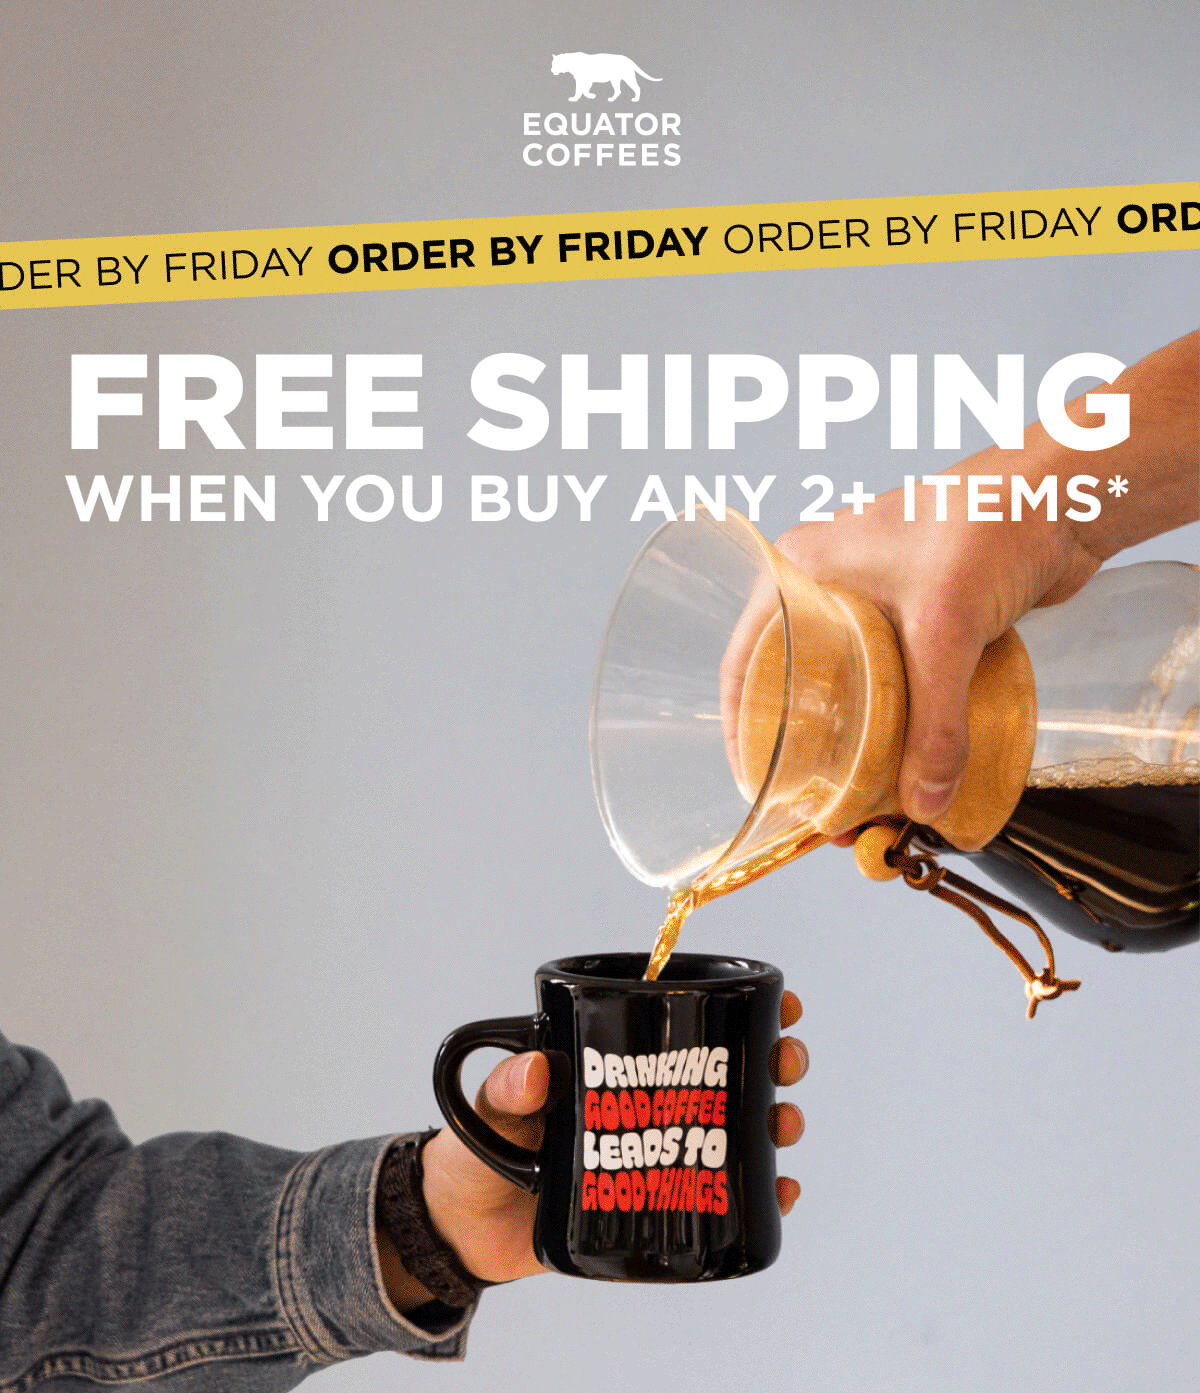 Free Shipping when you buy any 2+ items